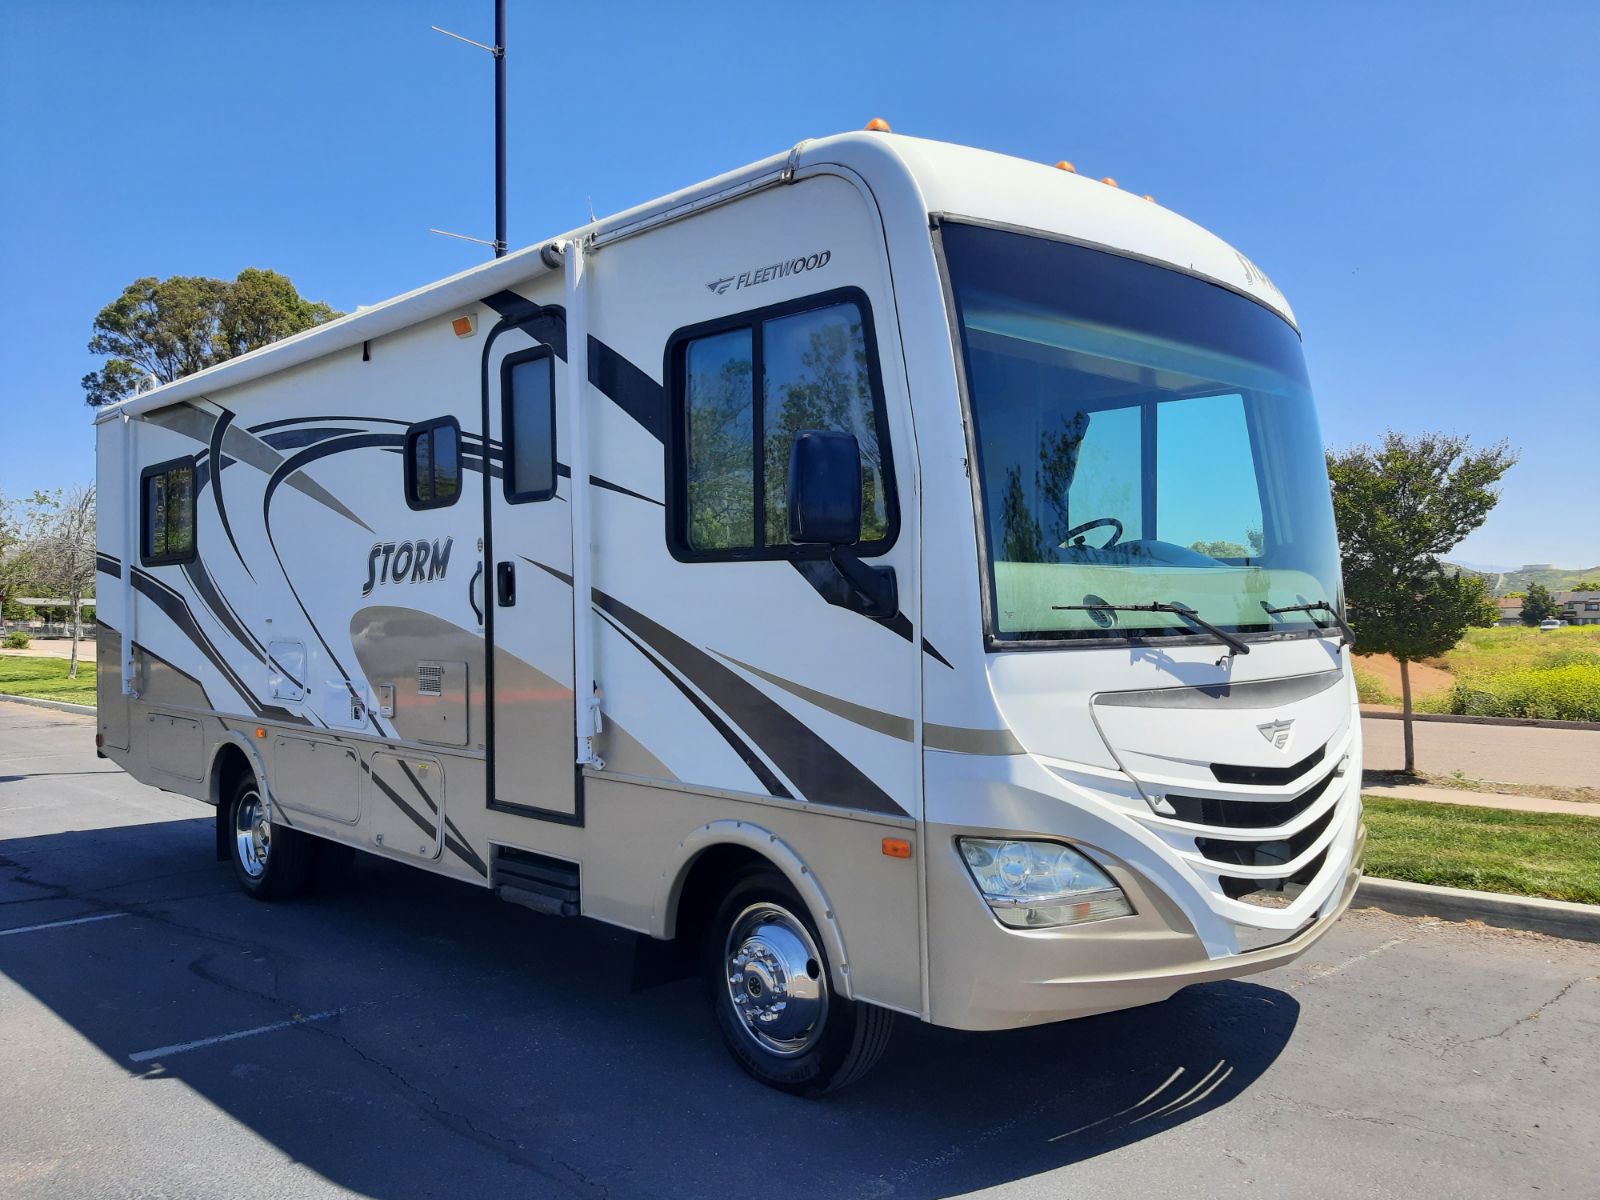 San Diego RV Sales - Buy and Sell RVs